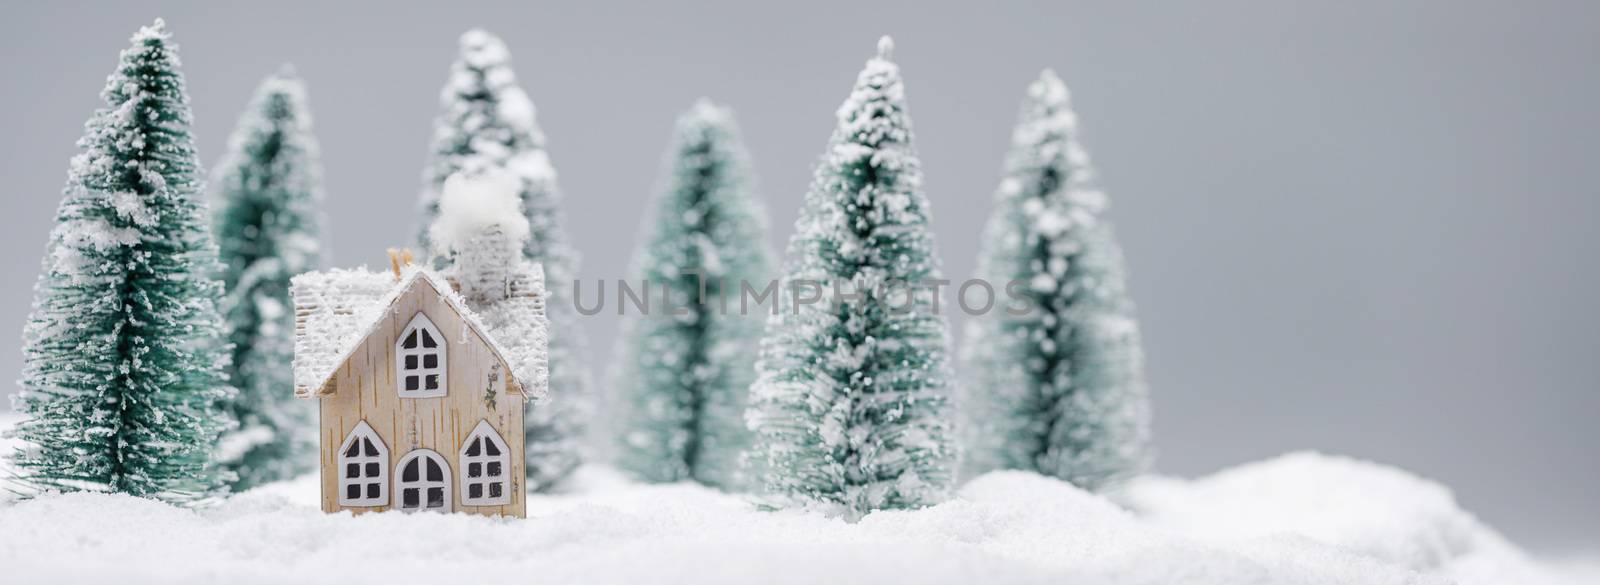 Little toy house on snow in forest by Yellowj